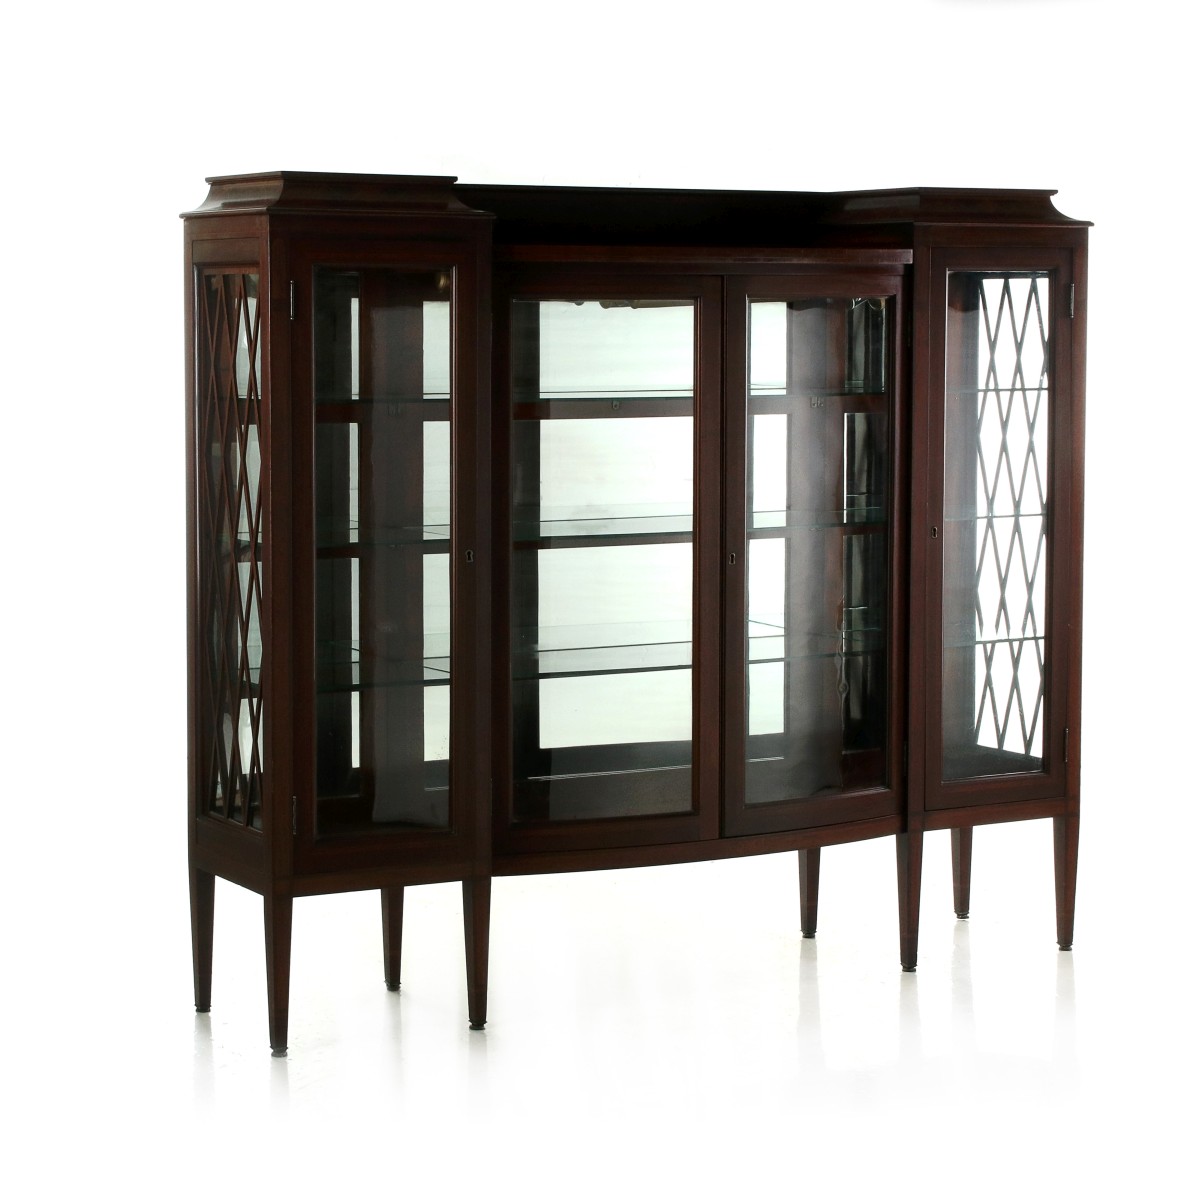 A BANDED AND LINE INLAY HEPPLEWHITE DISPLAY CABINET